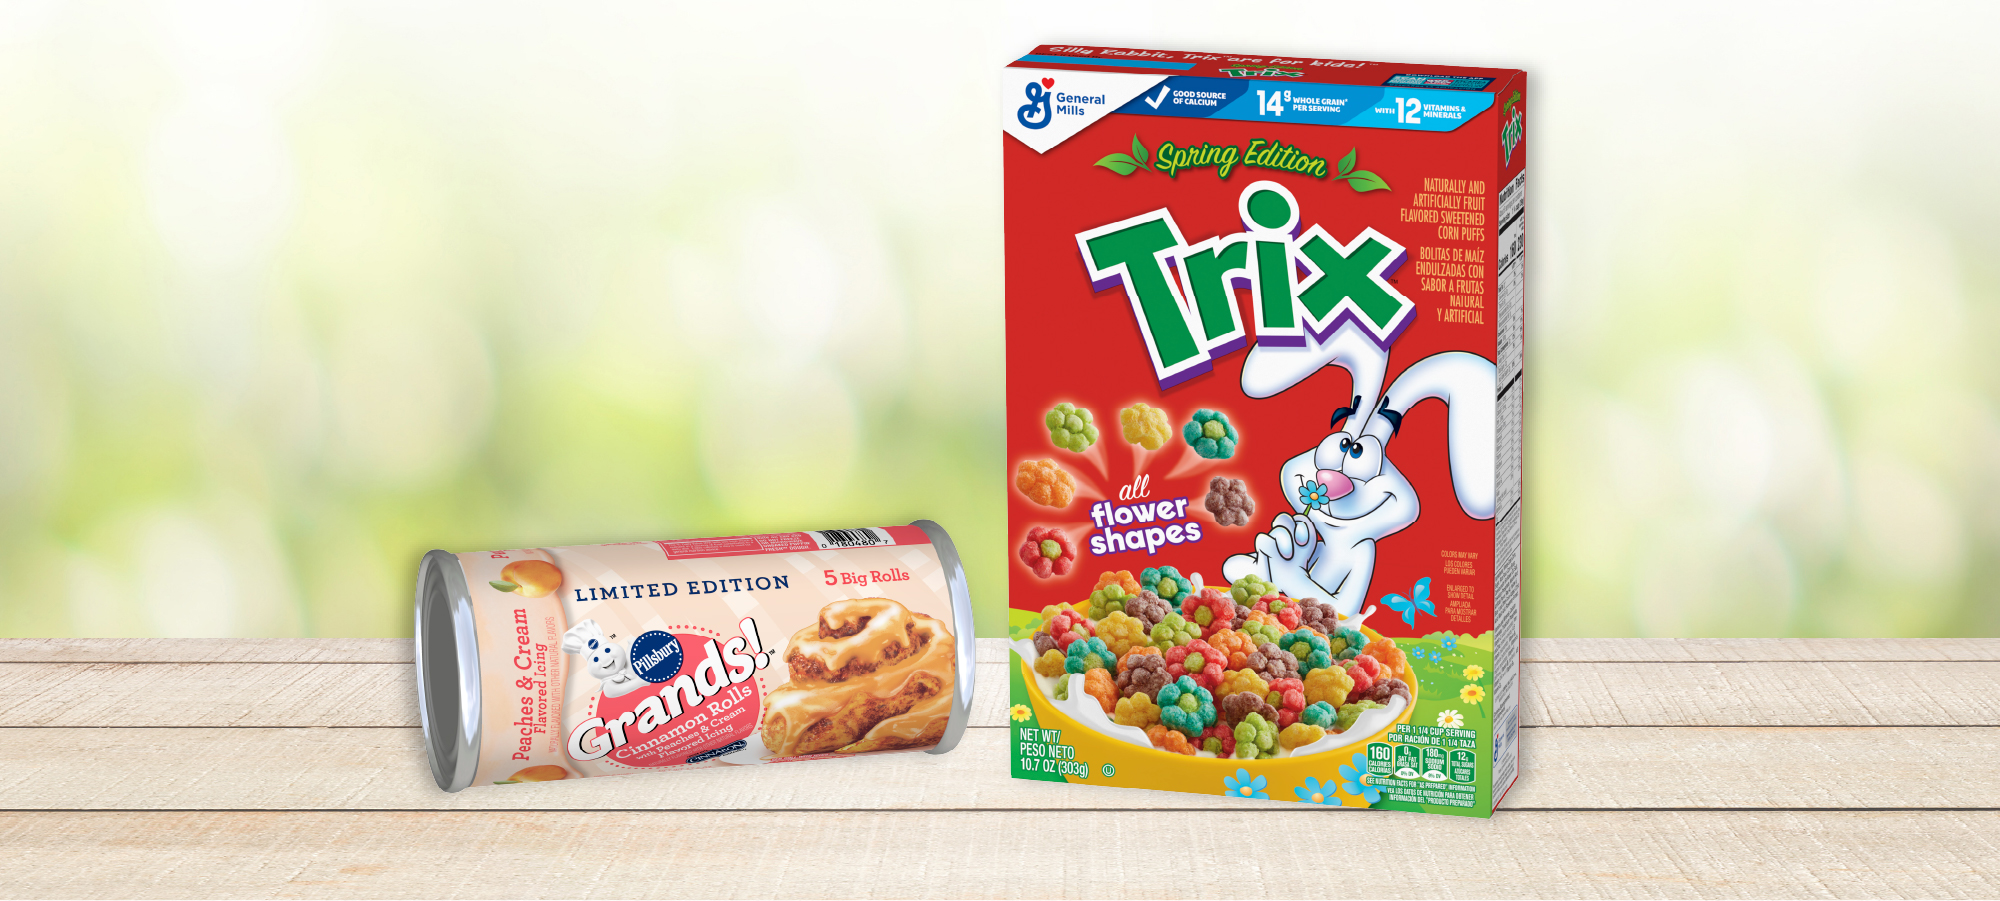 Pillsbury Grands! Cinnamon Rolls with Peaches & Cream Flavored Icing and Spring Edition Trix